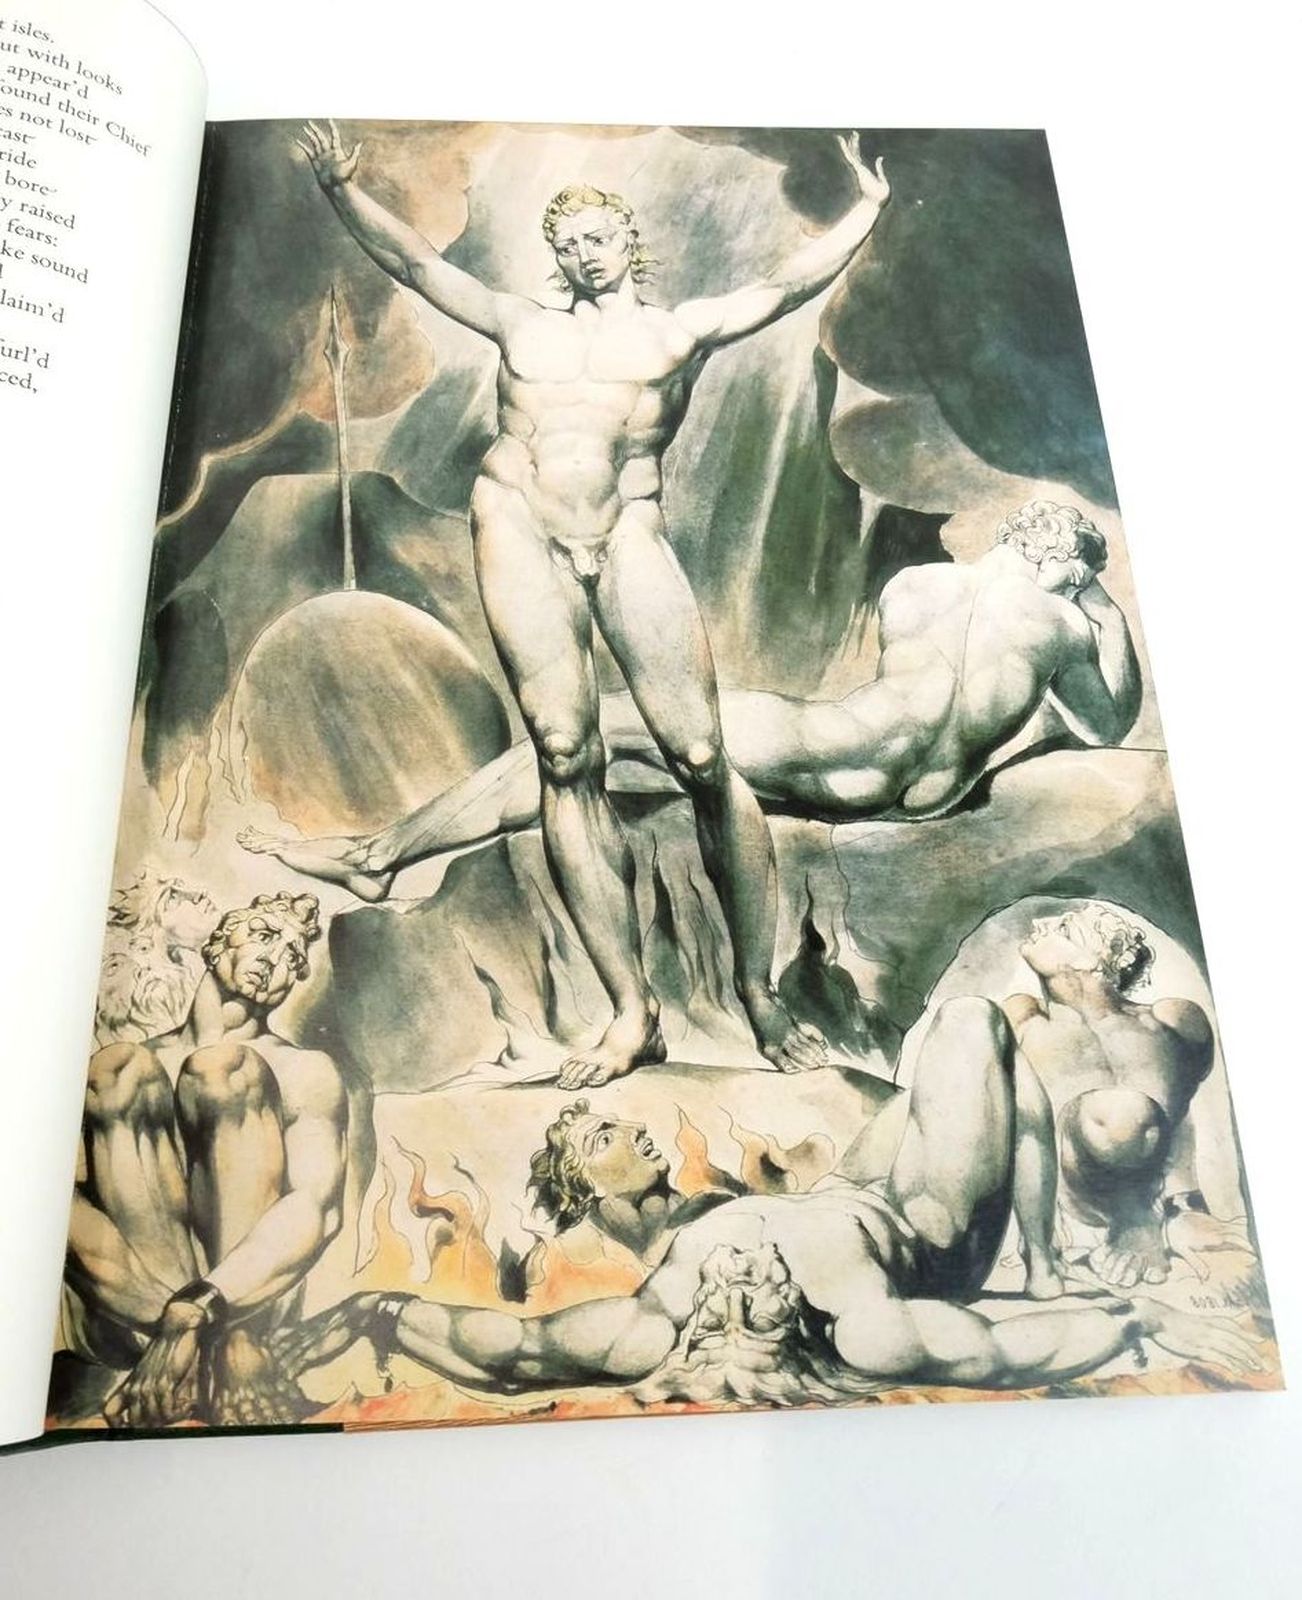 Photo of PARADISE LOST written by Milton, John
Ackroyd, Peter
Wain, John illustrated by Blake, William published by Folio Society (STOCK CODE: 1823018)  for sale by Stella & Rose's Books